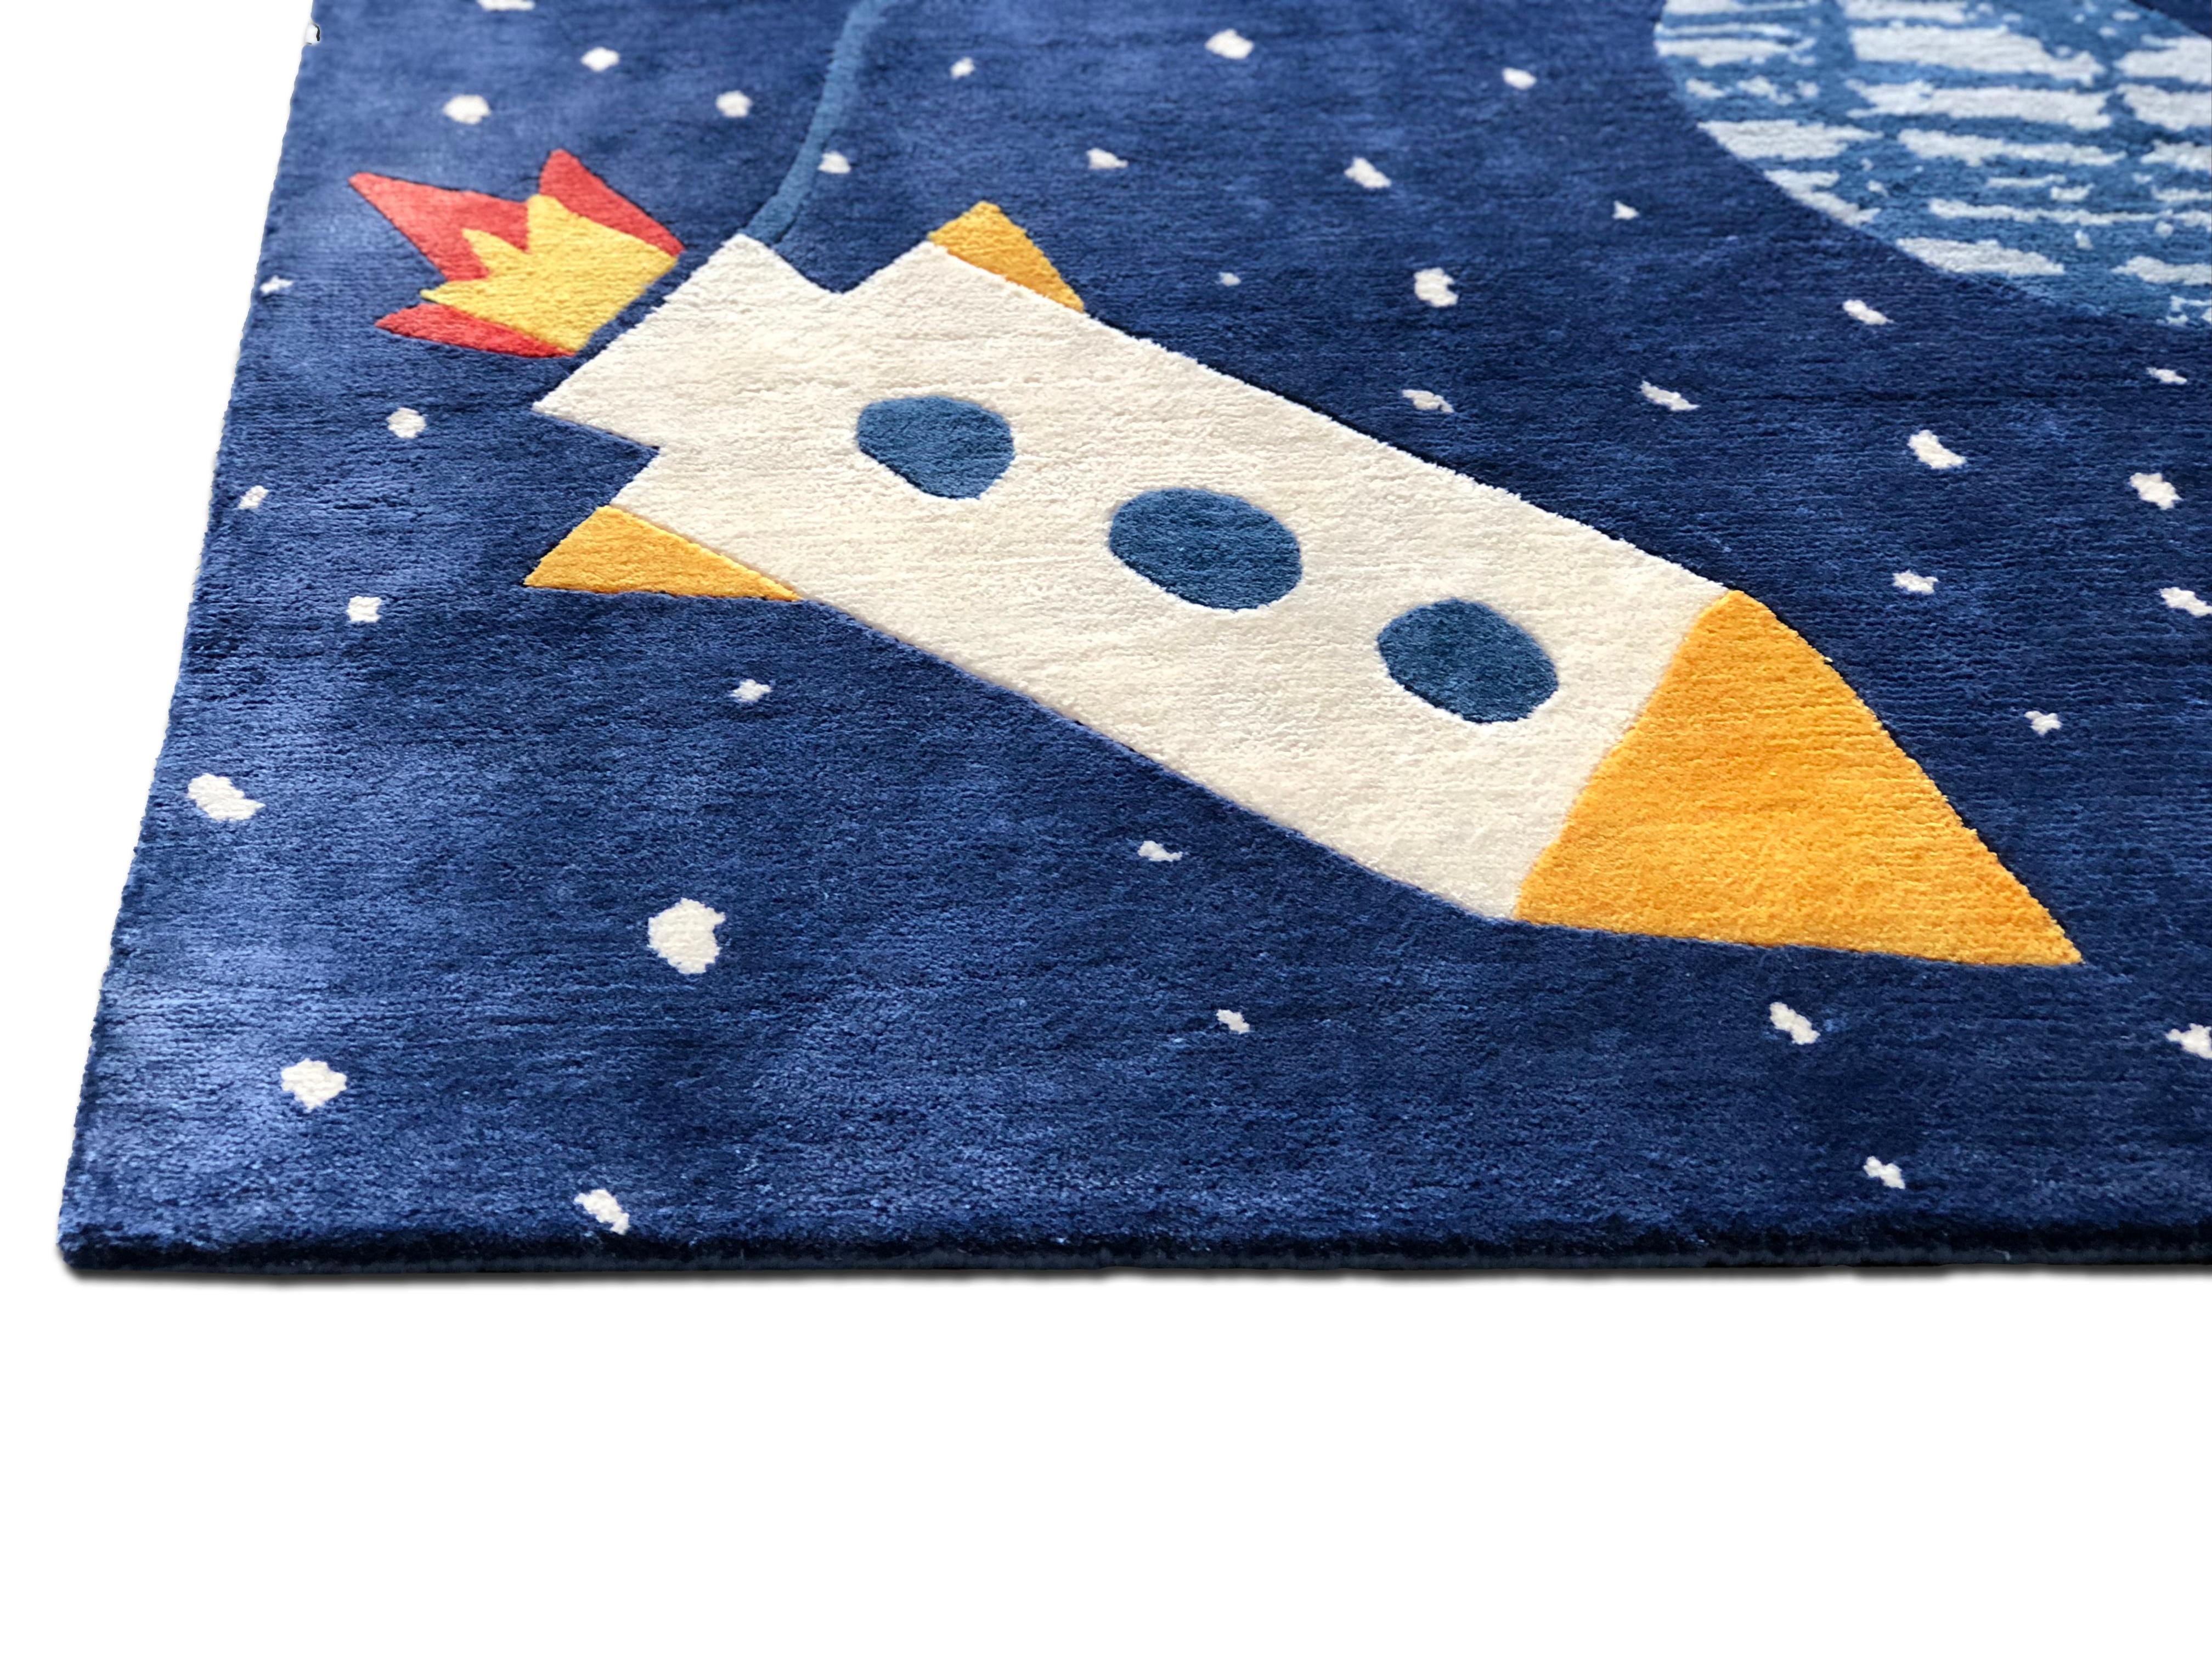 Hand-Knotted Space Ace Rug by Daria Solak, Hand Knotted, 100% New Zealand Wool 300x375cm For Sale